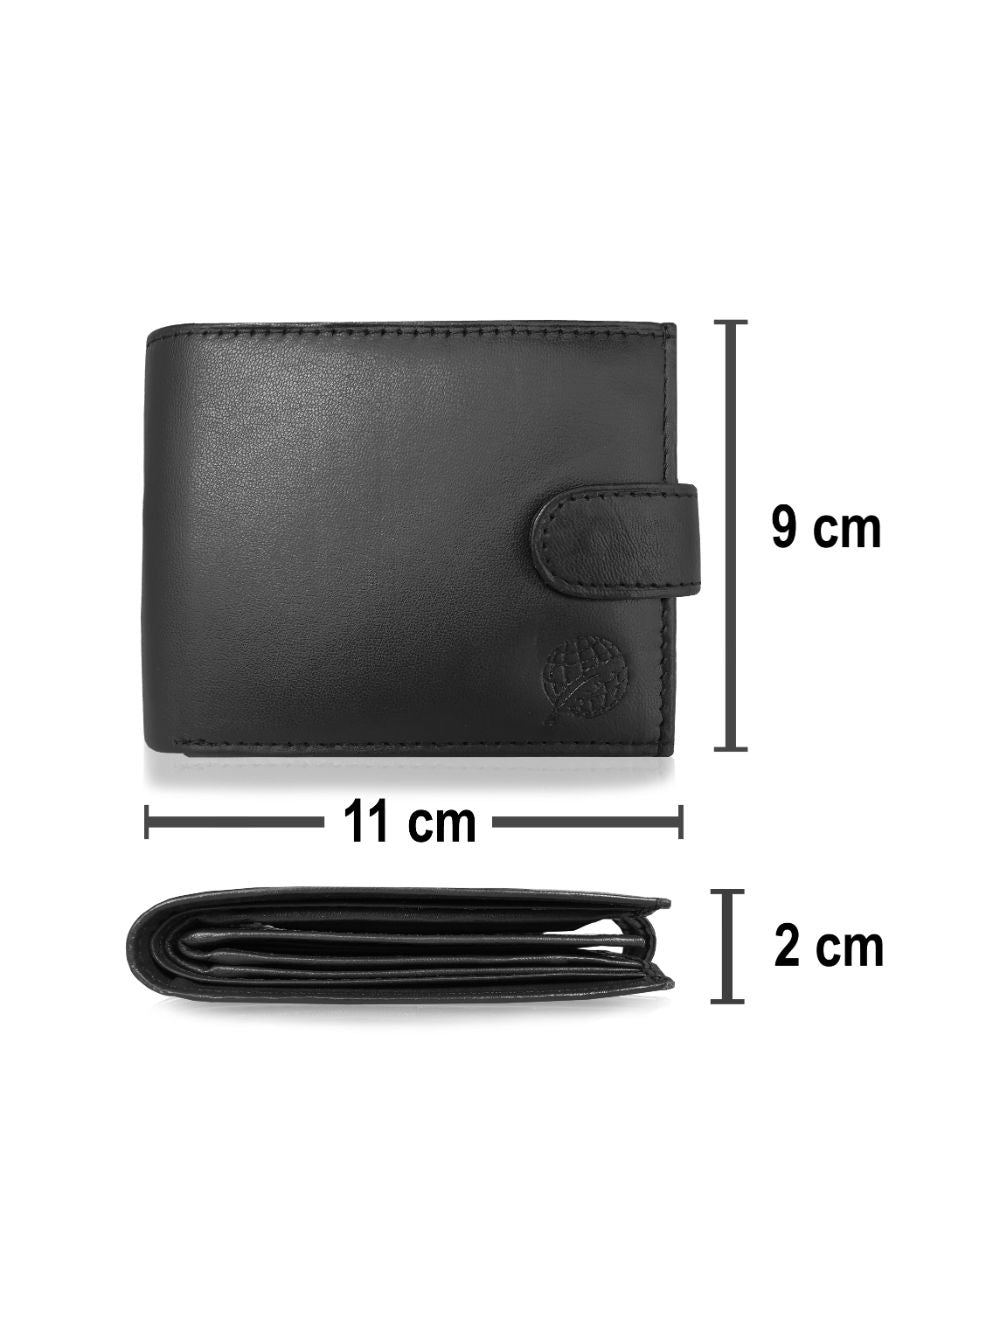 Designer Mens Wallet - Buttoned Coin Pouch - 9 Card Slots - RL374